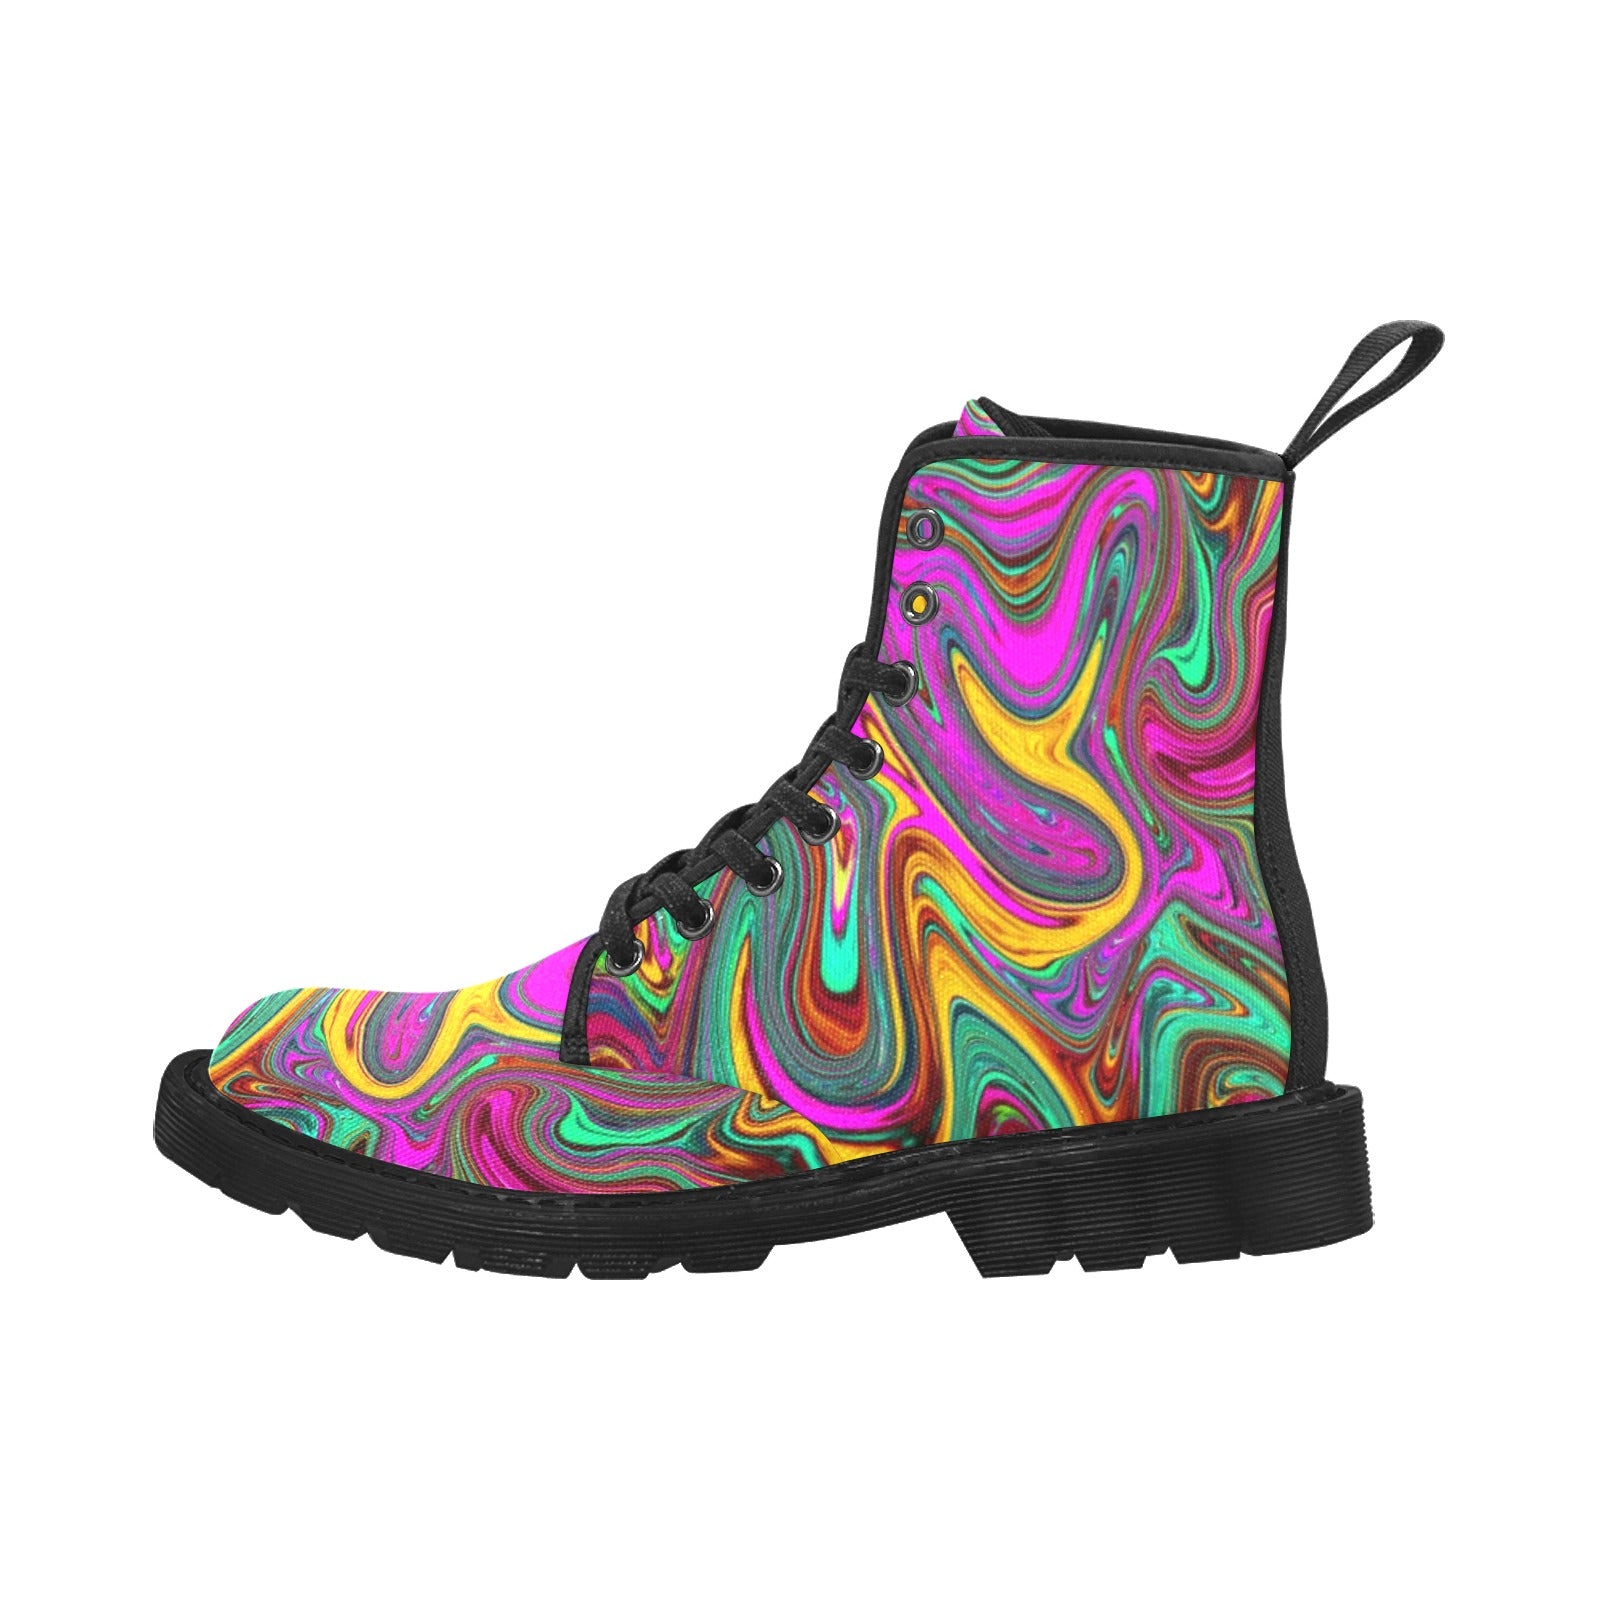 Boots for Women, Marbled Hot Pink and Sea Foam Green Abstract Art - Black